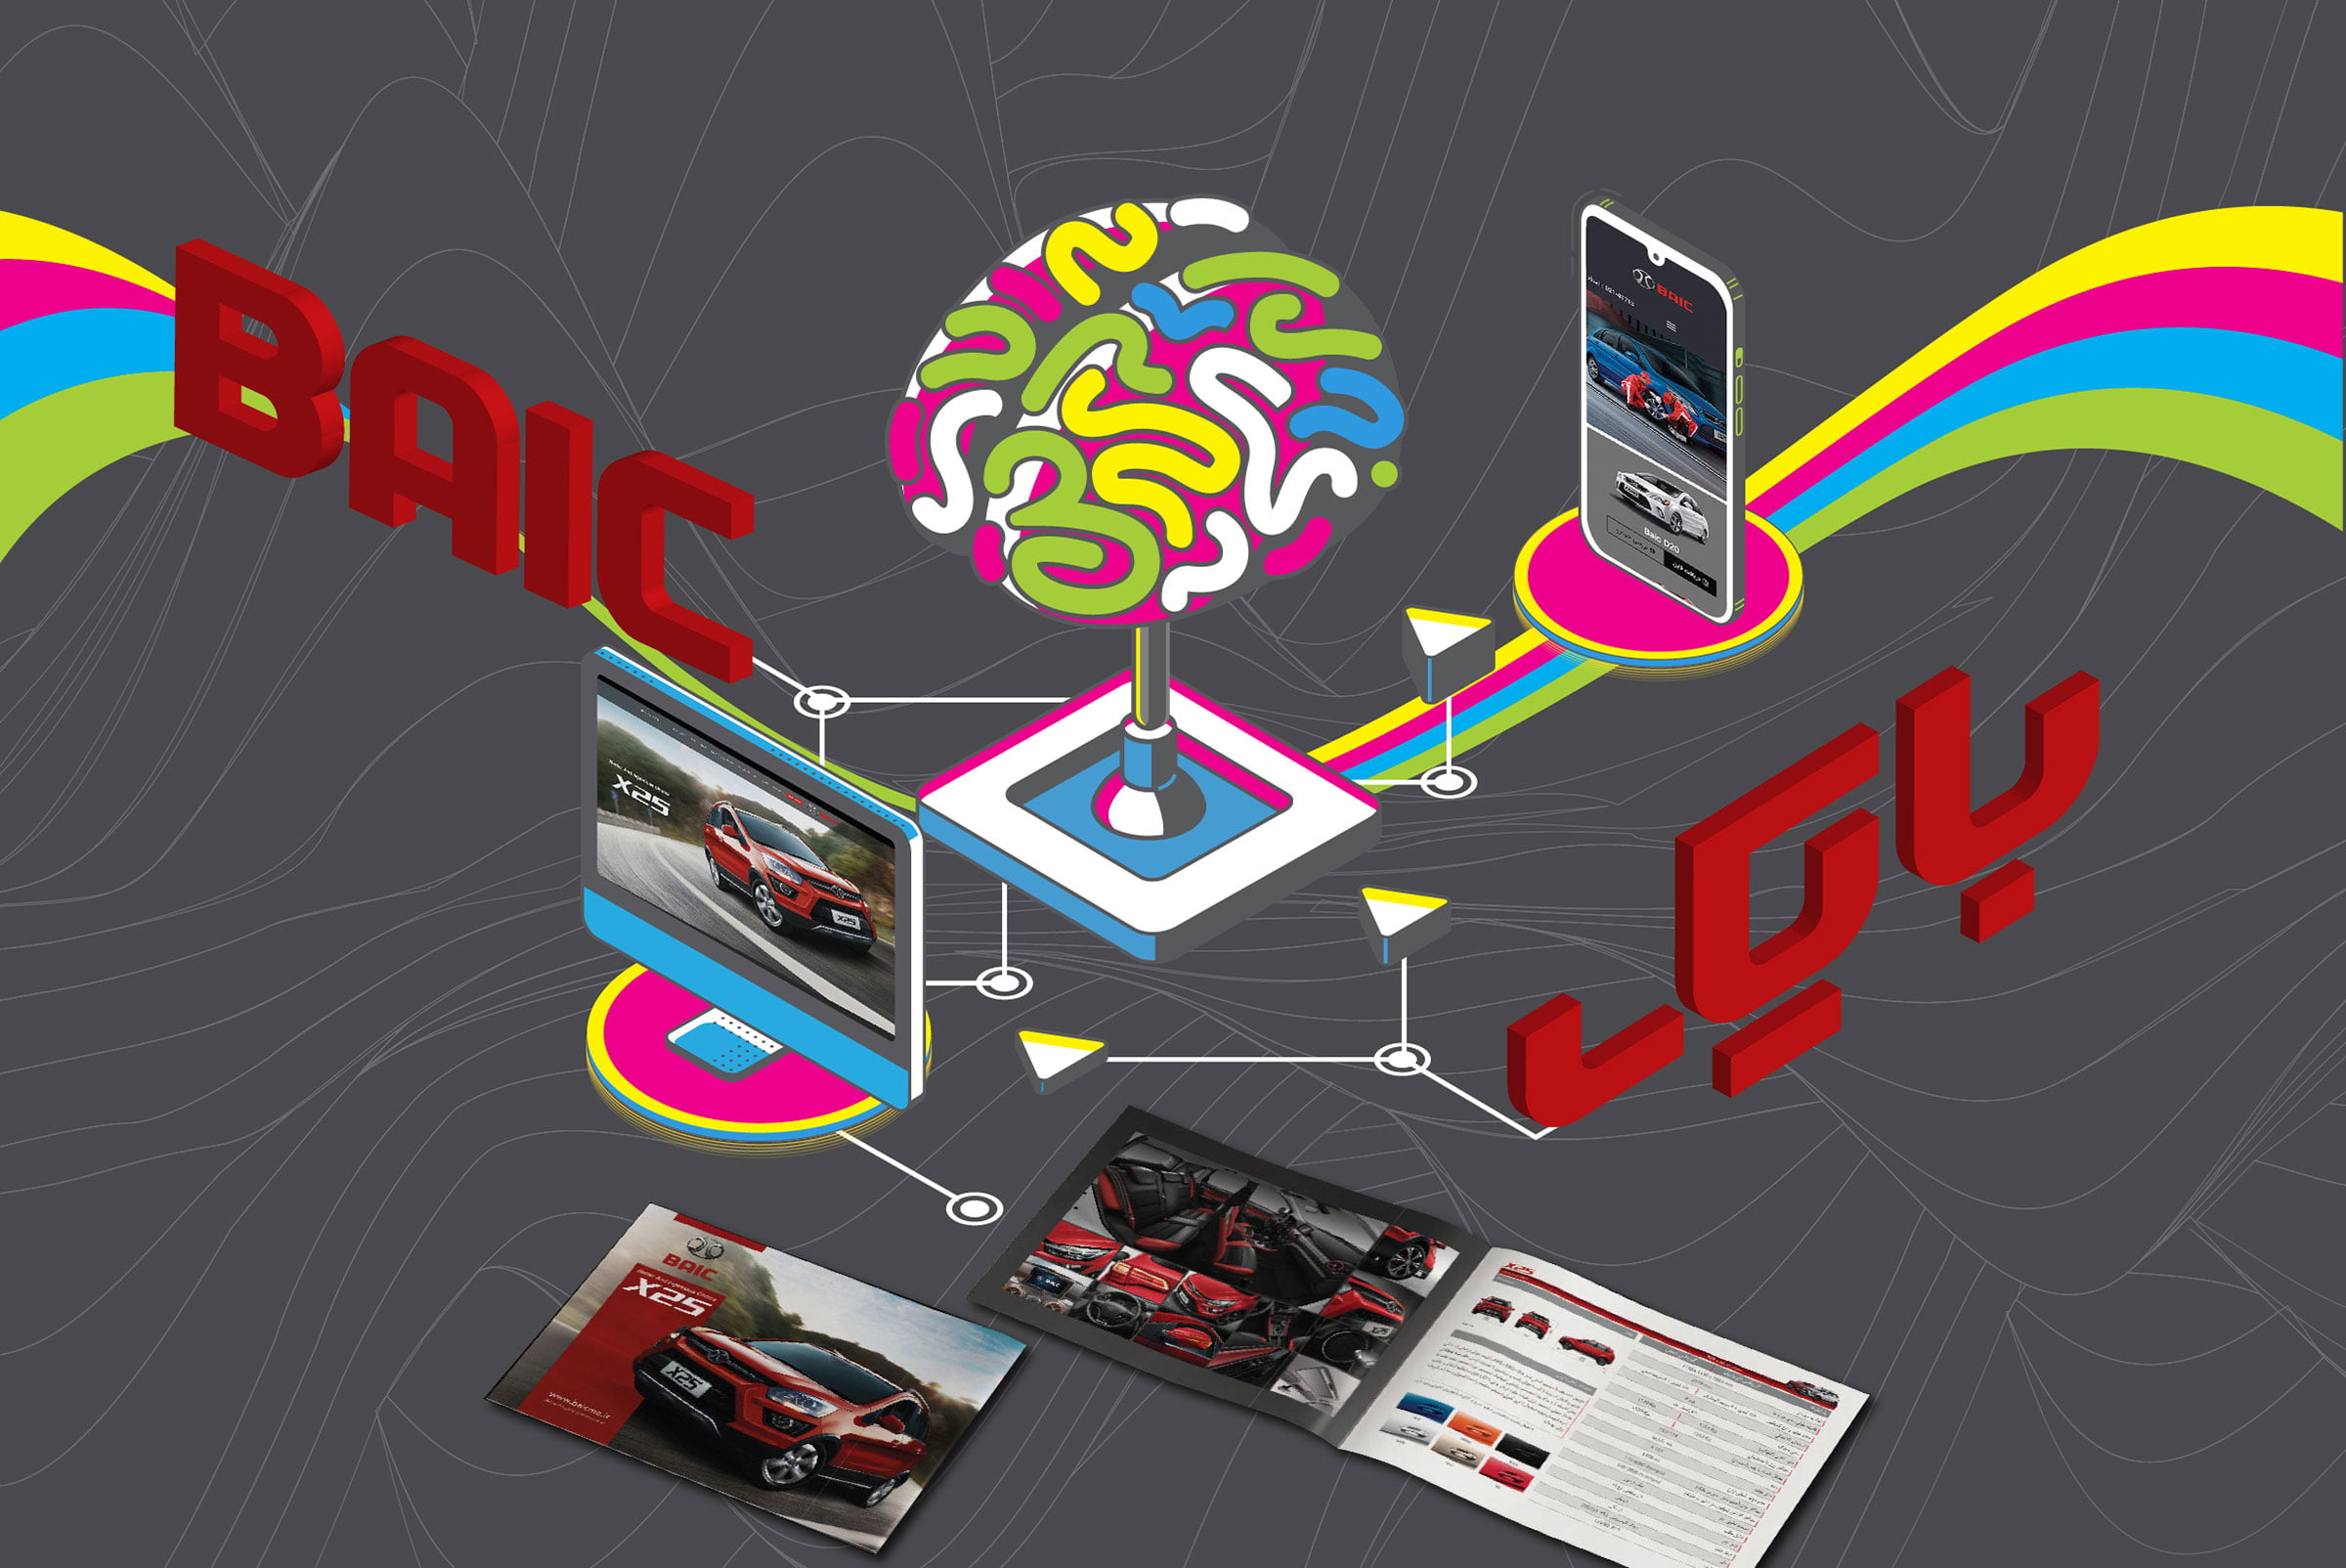 Zigma8 planned a branding and marketing strategy in Iran for BAIC